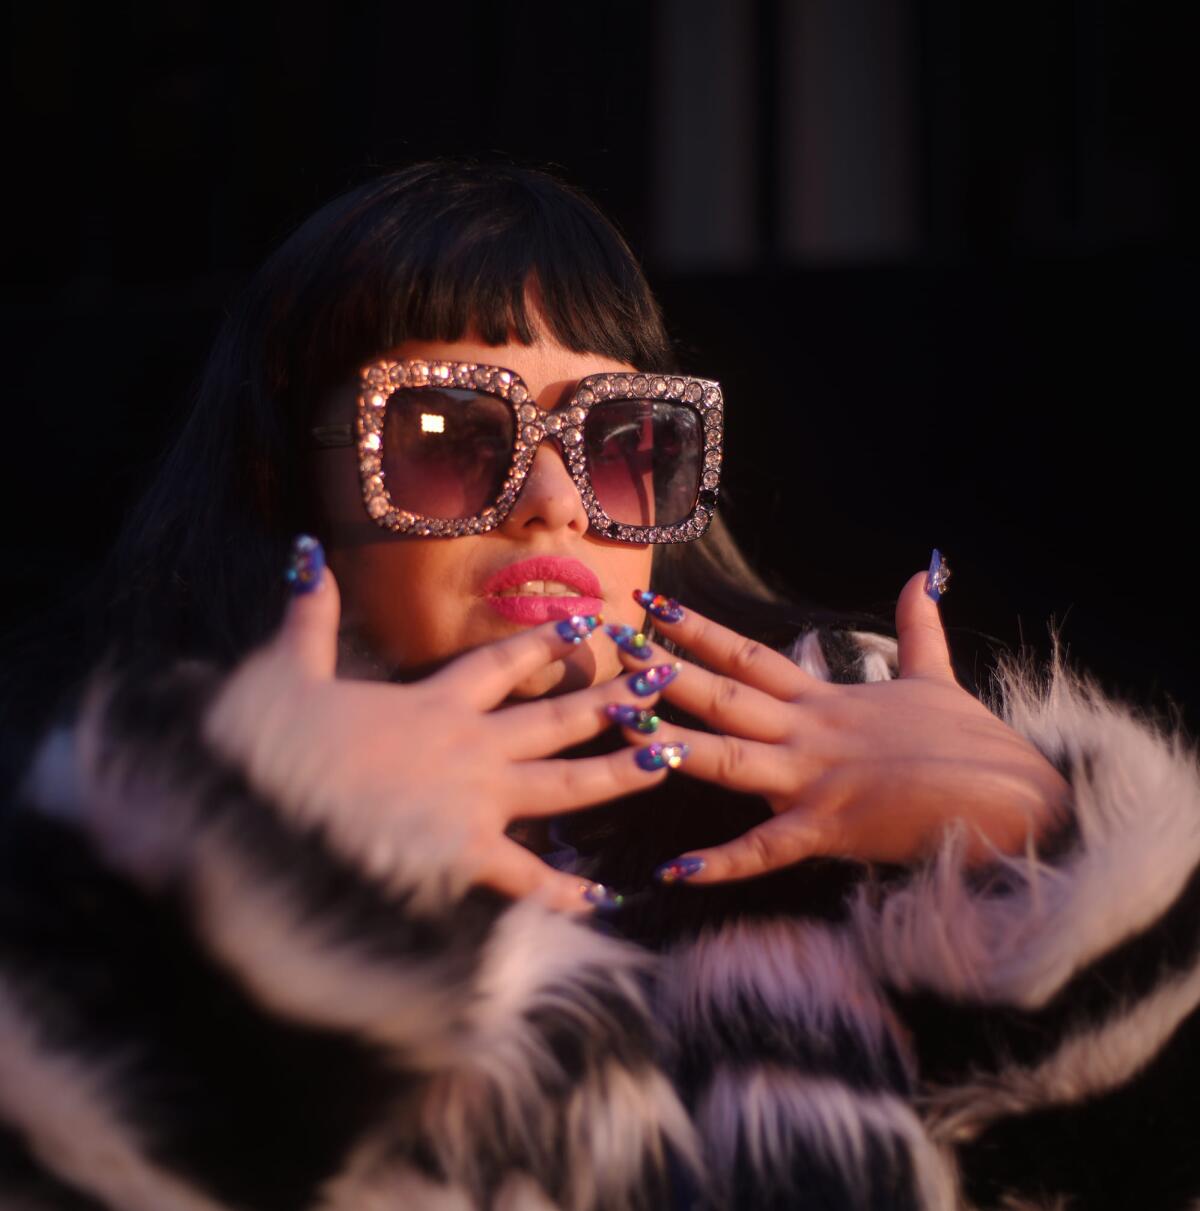 A young woman in bling'd out shades shows of her manicure